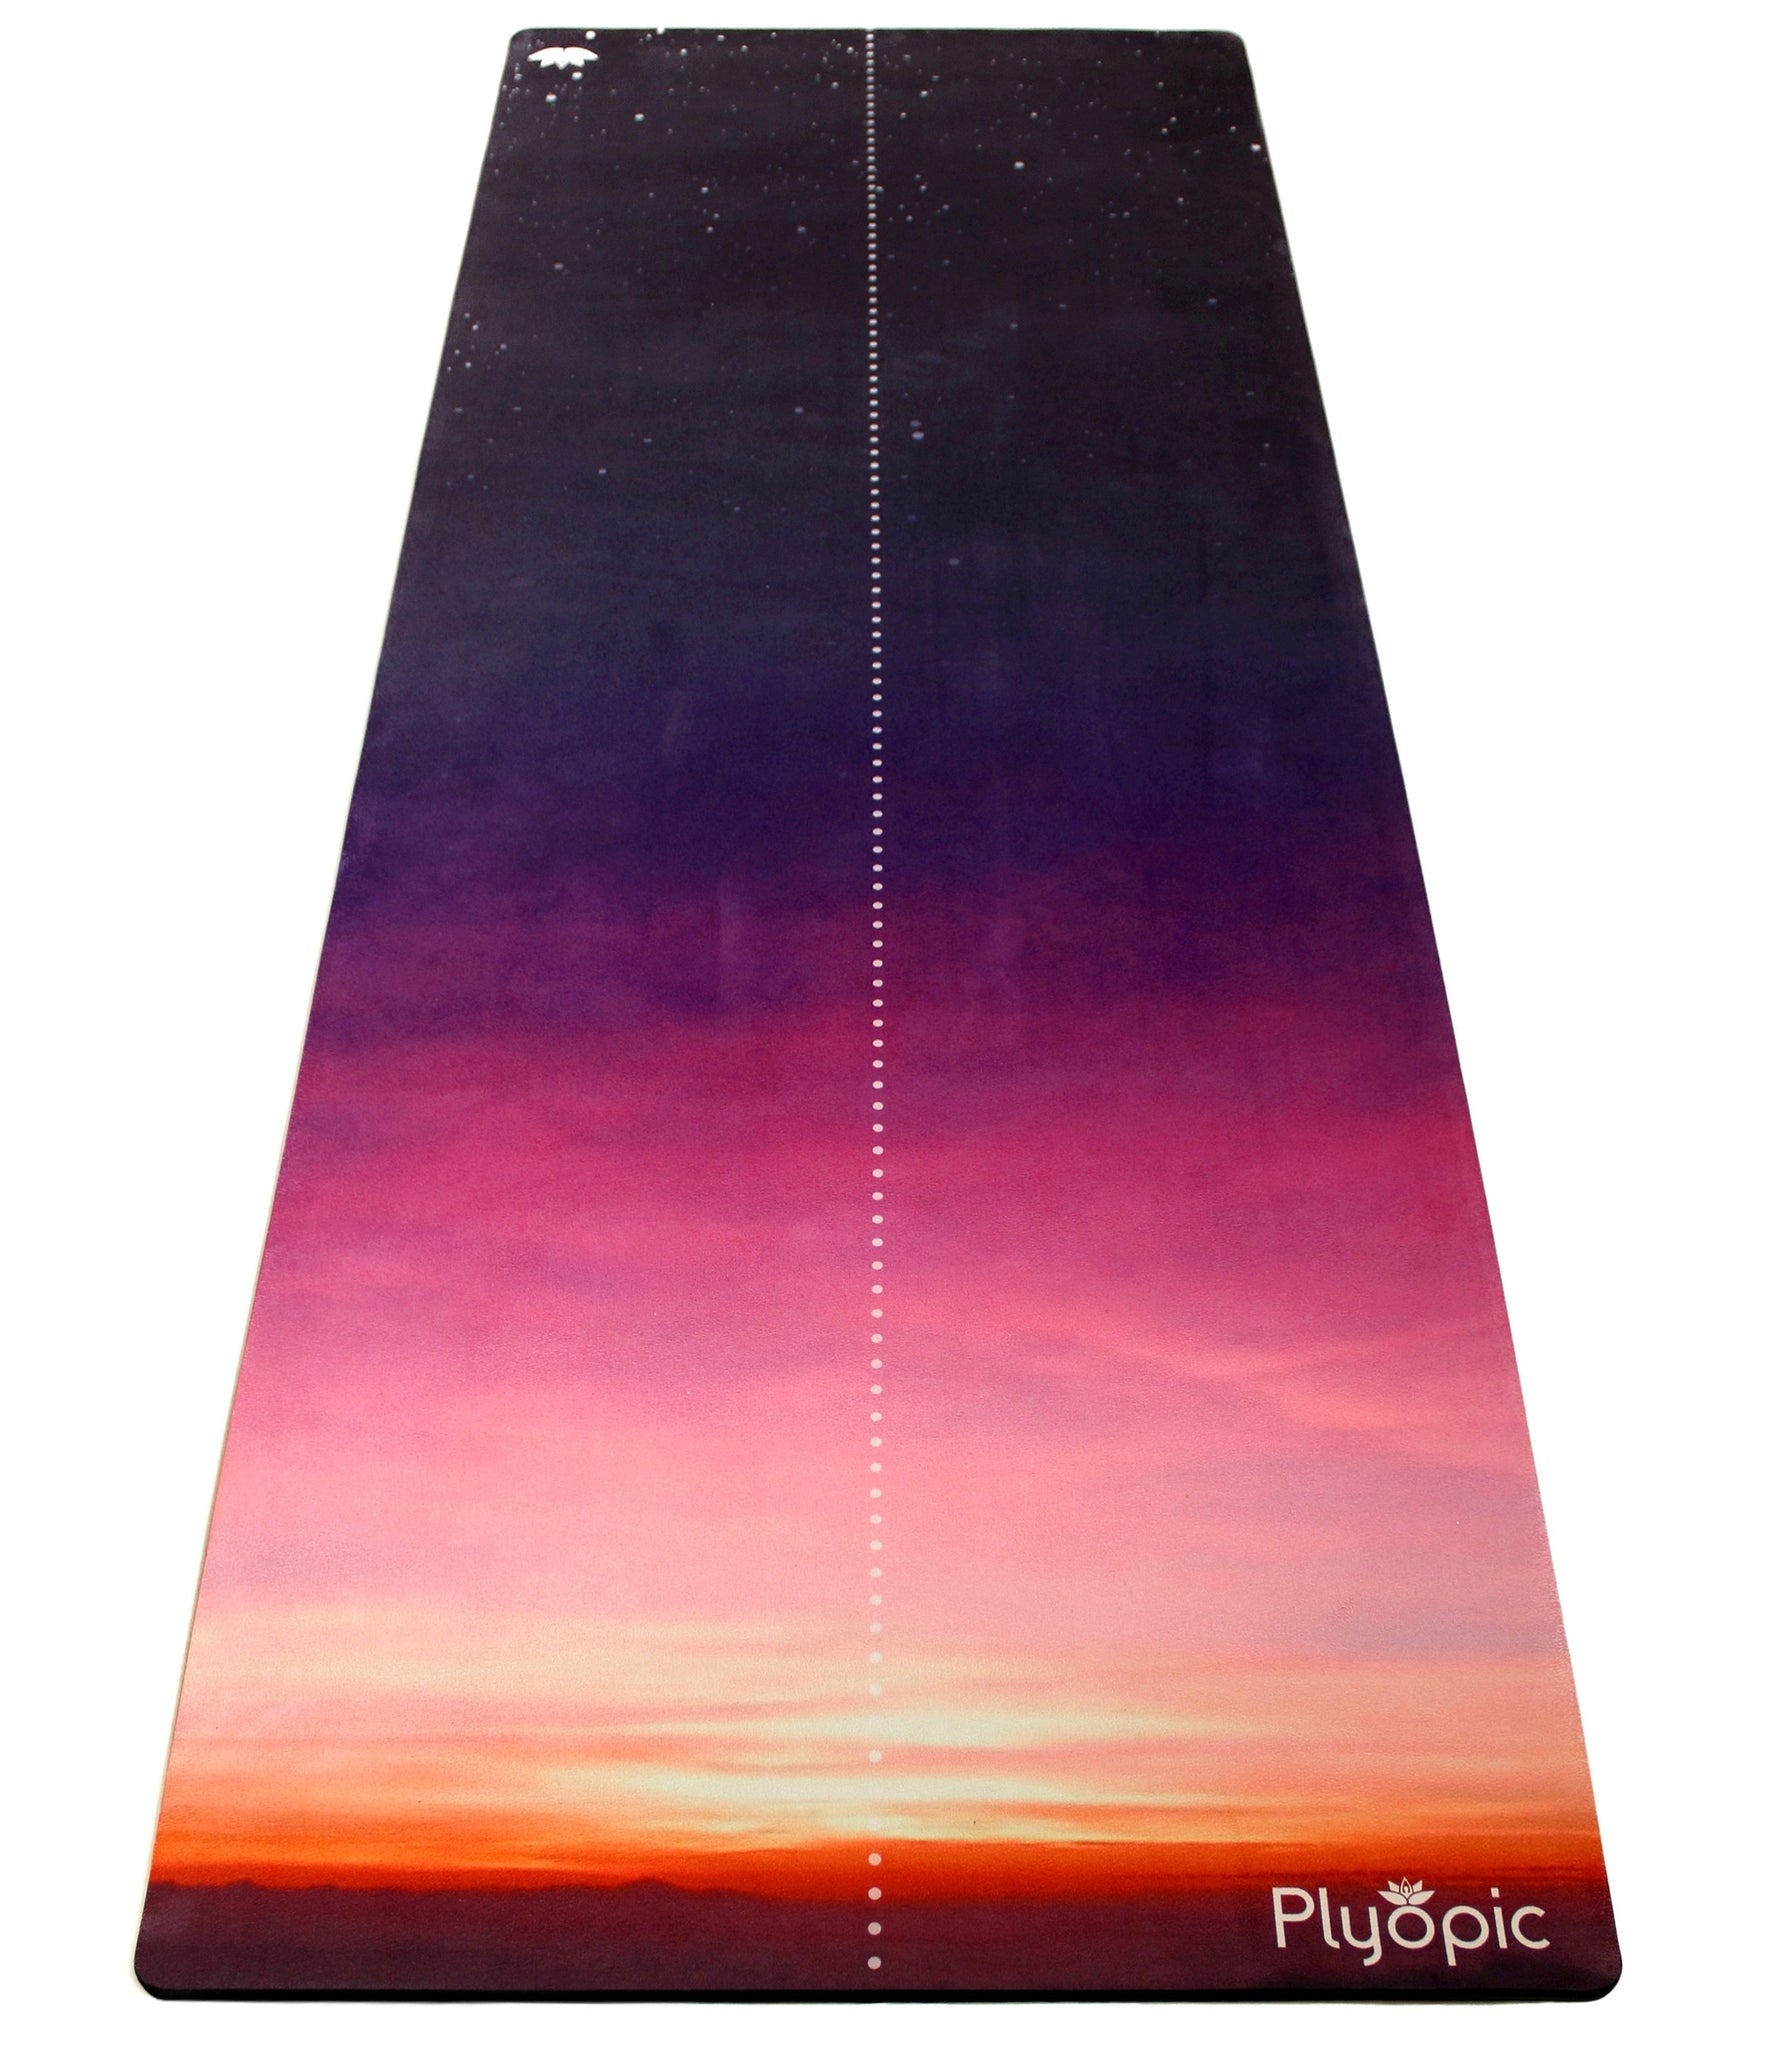 Plyopic-All In One Yoga Mat Stratospheric-Yoga Mat